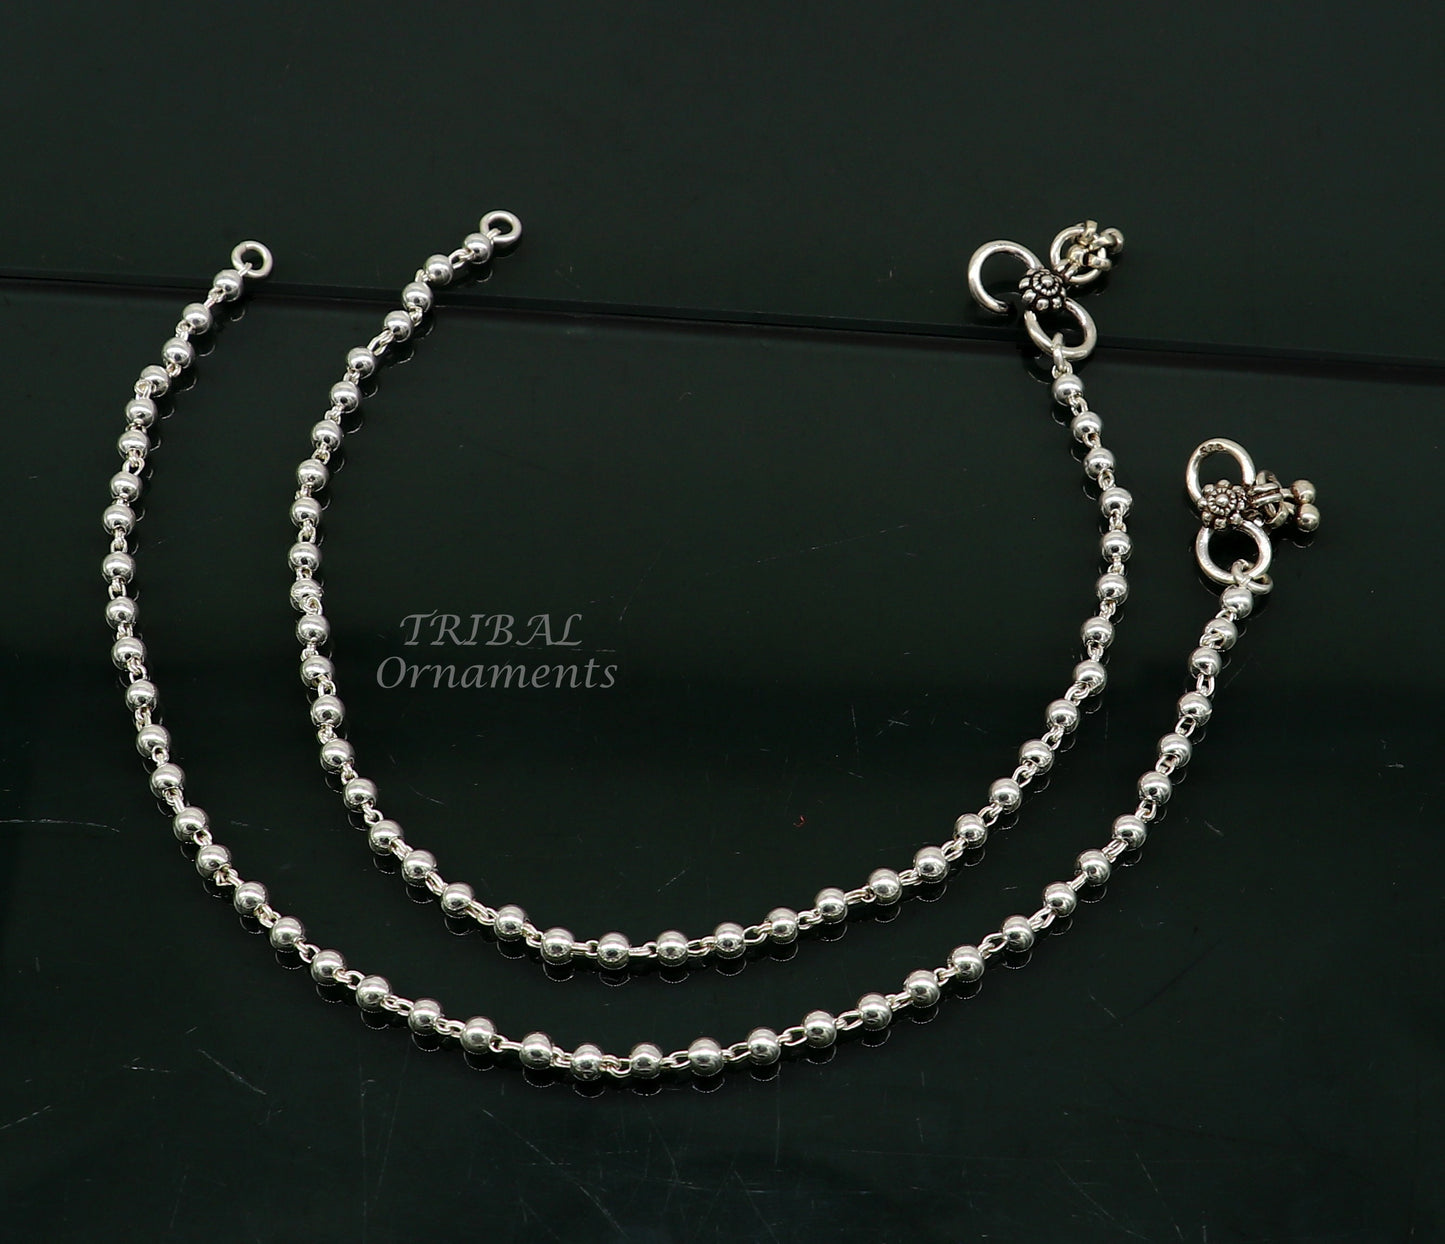 4mm 9"to 12" 925 sterling silver beaded/ball chain anklet bracelet amazing light weight delicate anklets belly dance silver jewelry ank538 - TRIBAL ORNAMENTS